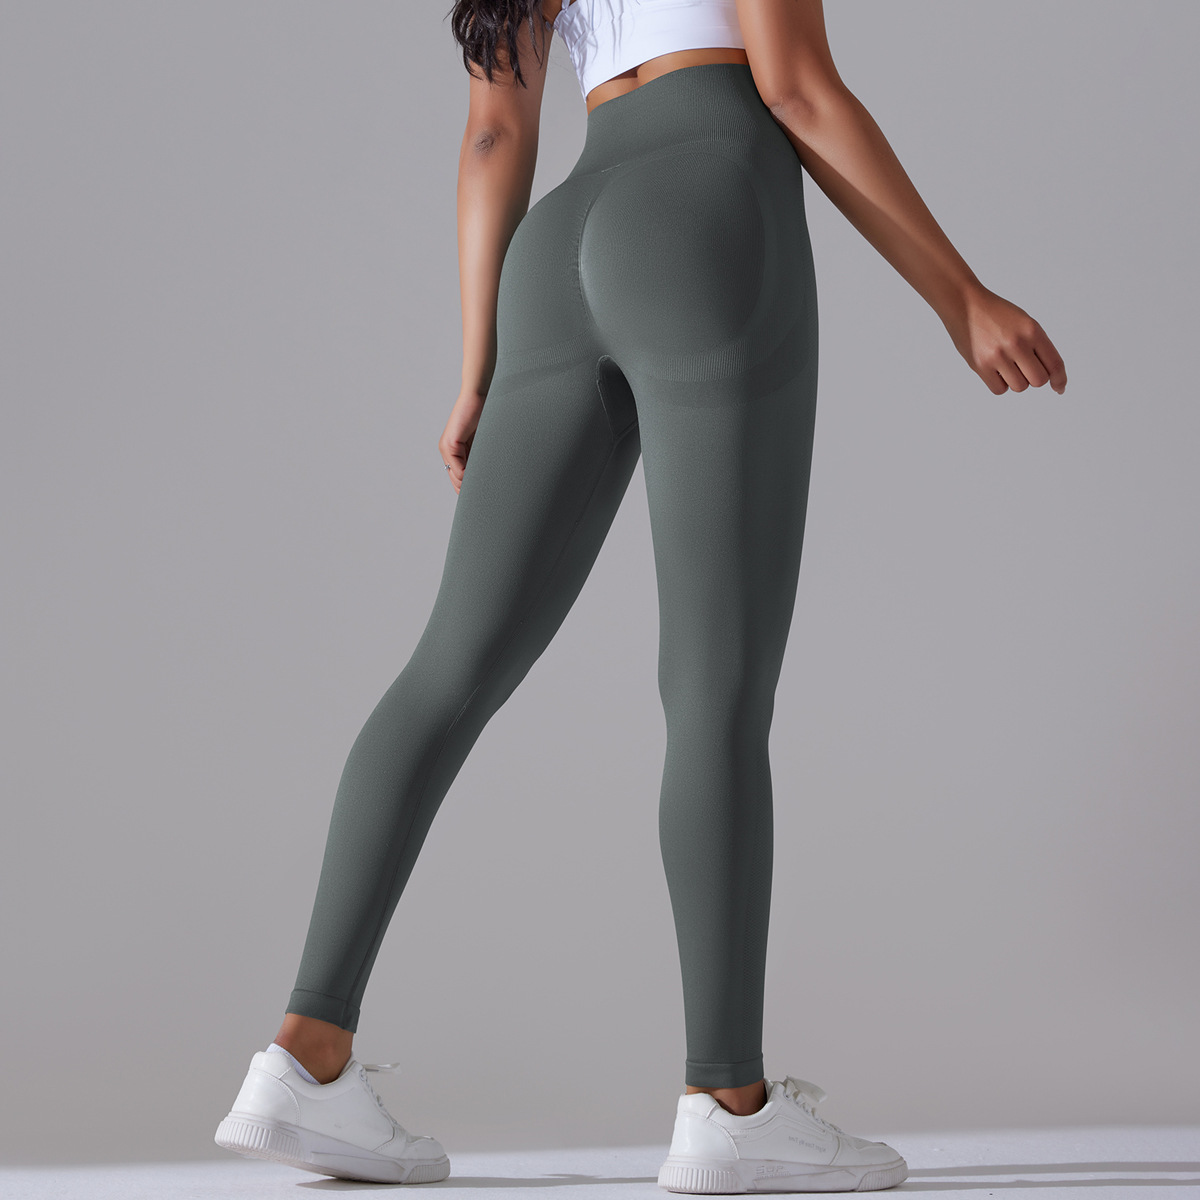 Women's Fitness Clothing - Yoga and Exercise Clothes Online